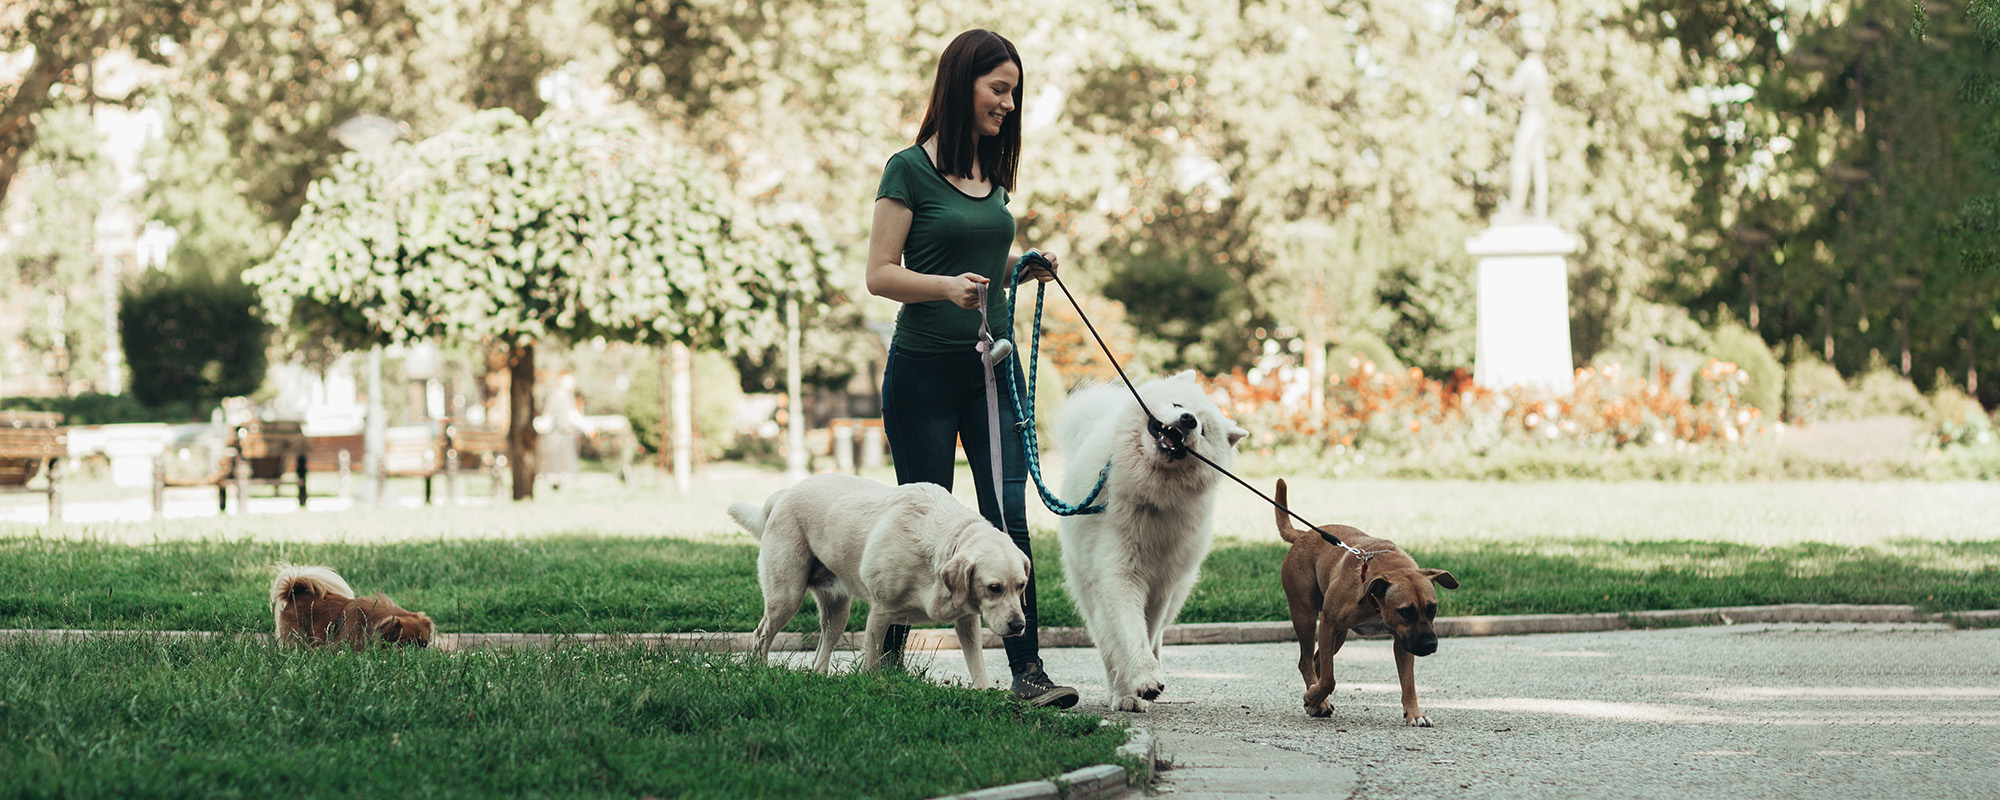 dog walker enjoying with dogs while walking outdoors.